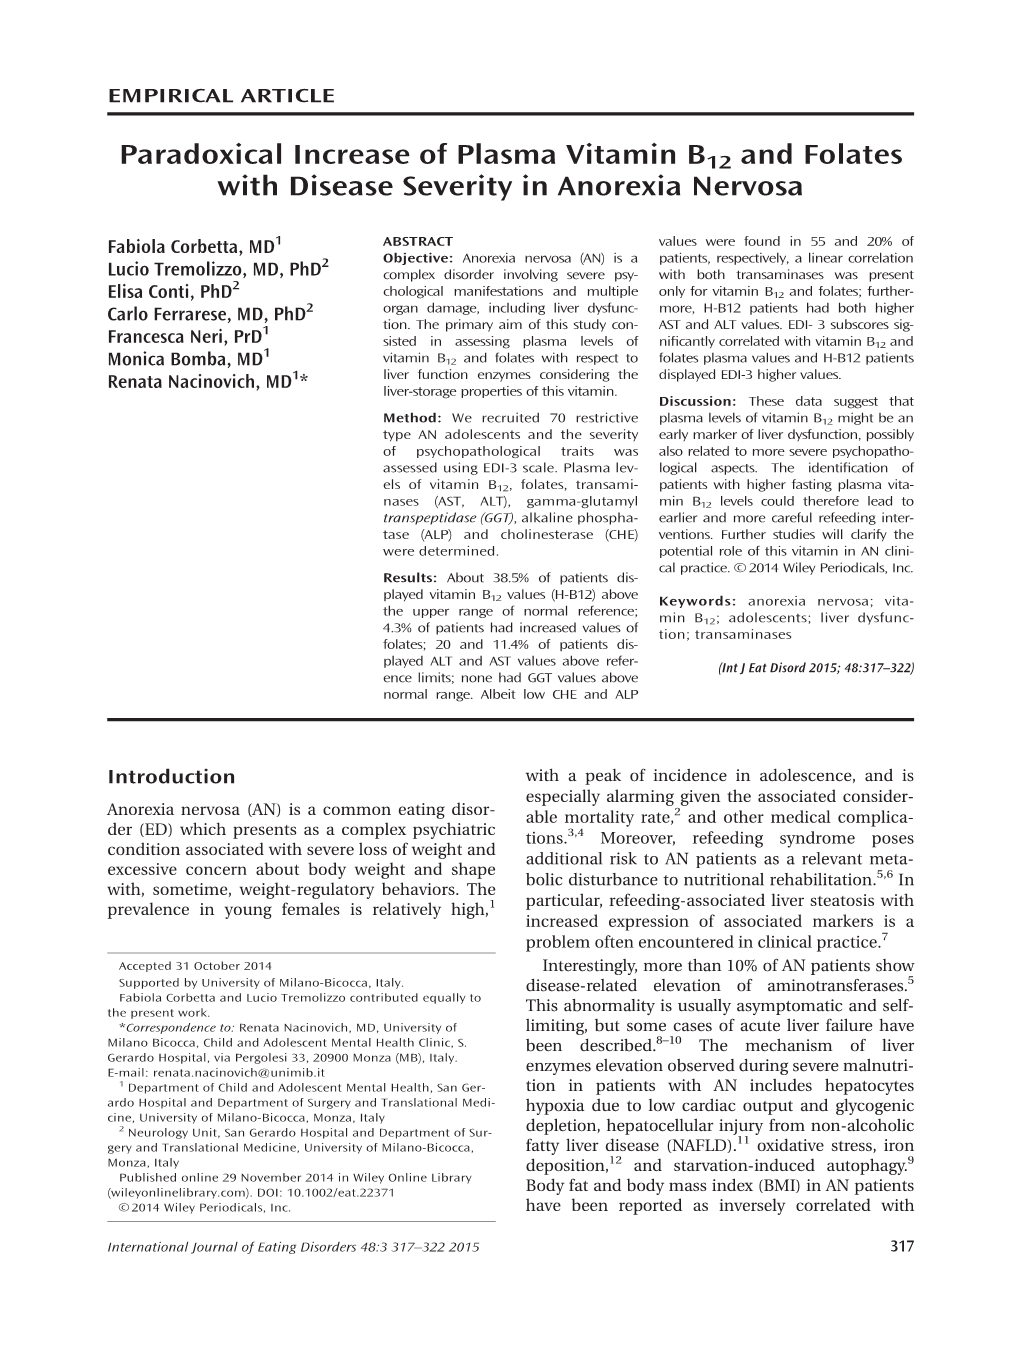 Paradoxical Increase of Plasma Vitamin B12 and Folates with Disease Severity in Anorexia Nervosa